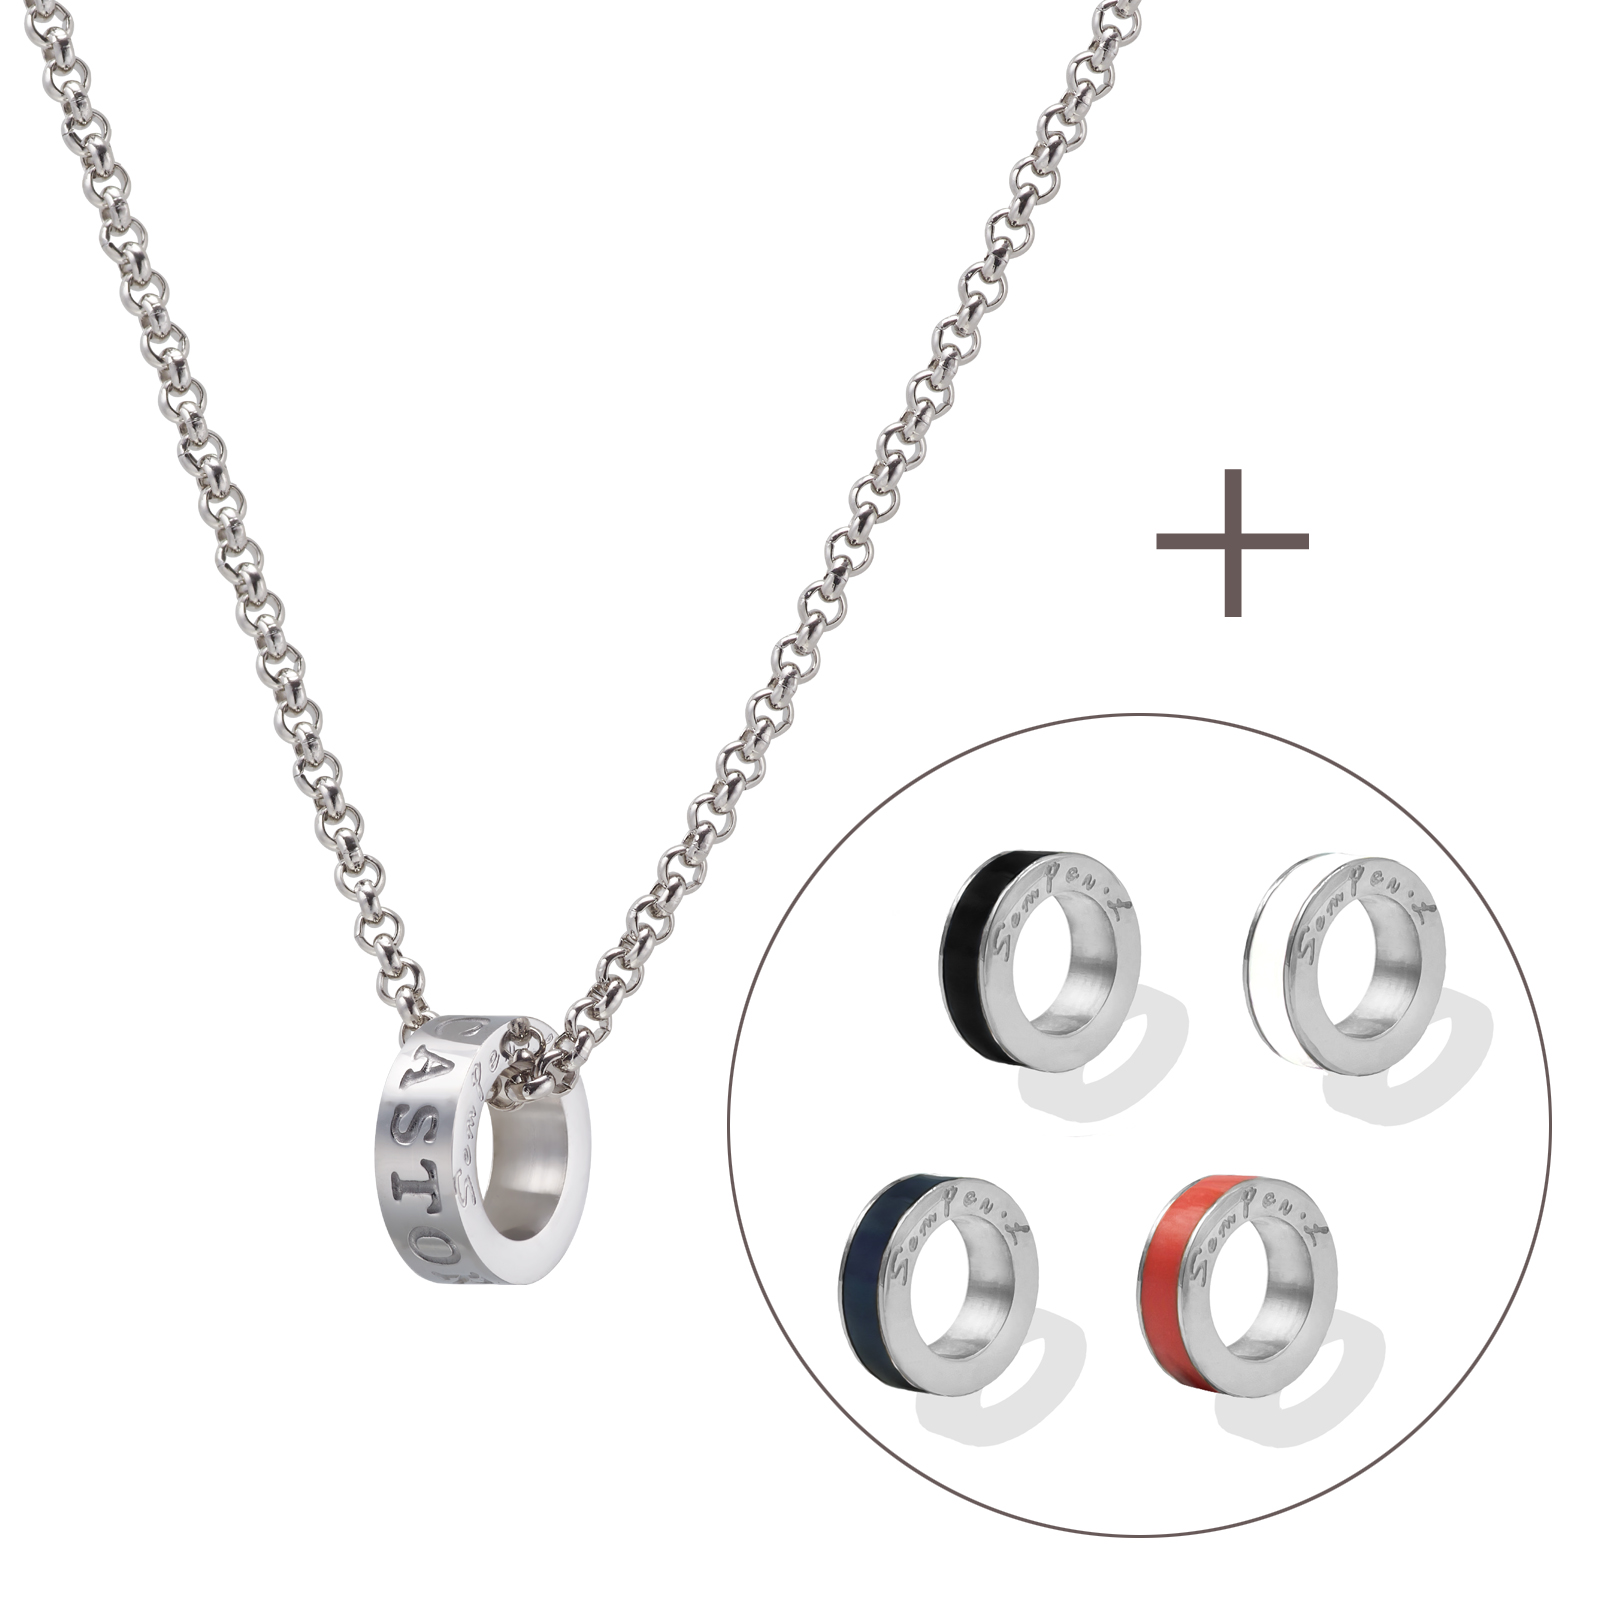 Timeless Necklace Set - S - WG [Necklace+Charm]  [LN0025-WG + LC0002]